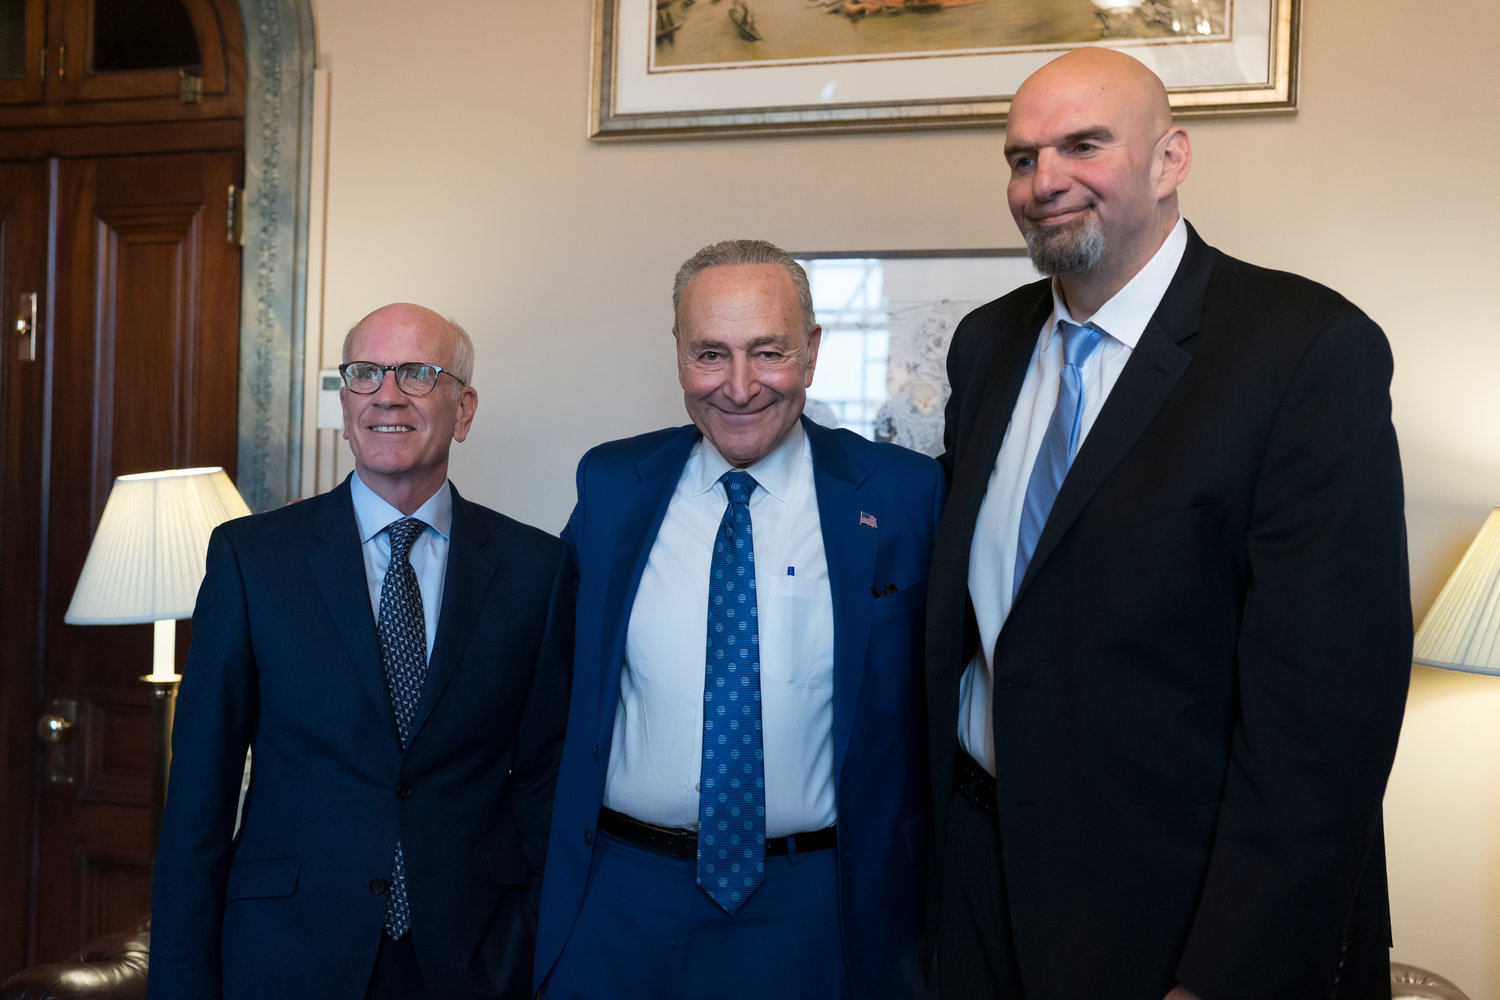 Senate Majority Leader Chuck Schumer, D-N.Y., center, welcomes Senator-elect Peter Welch, D-Vt., left, and Senator-elect John Fetterman, D-Pa., whose victories helped give Democrats the majority in the next Congress, at the Capitol in Washington, Tuesday, Nov. 15, 2022.